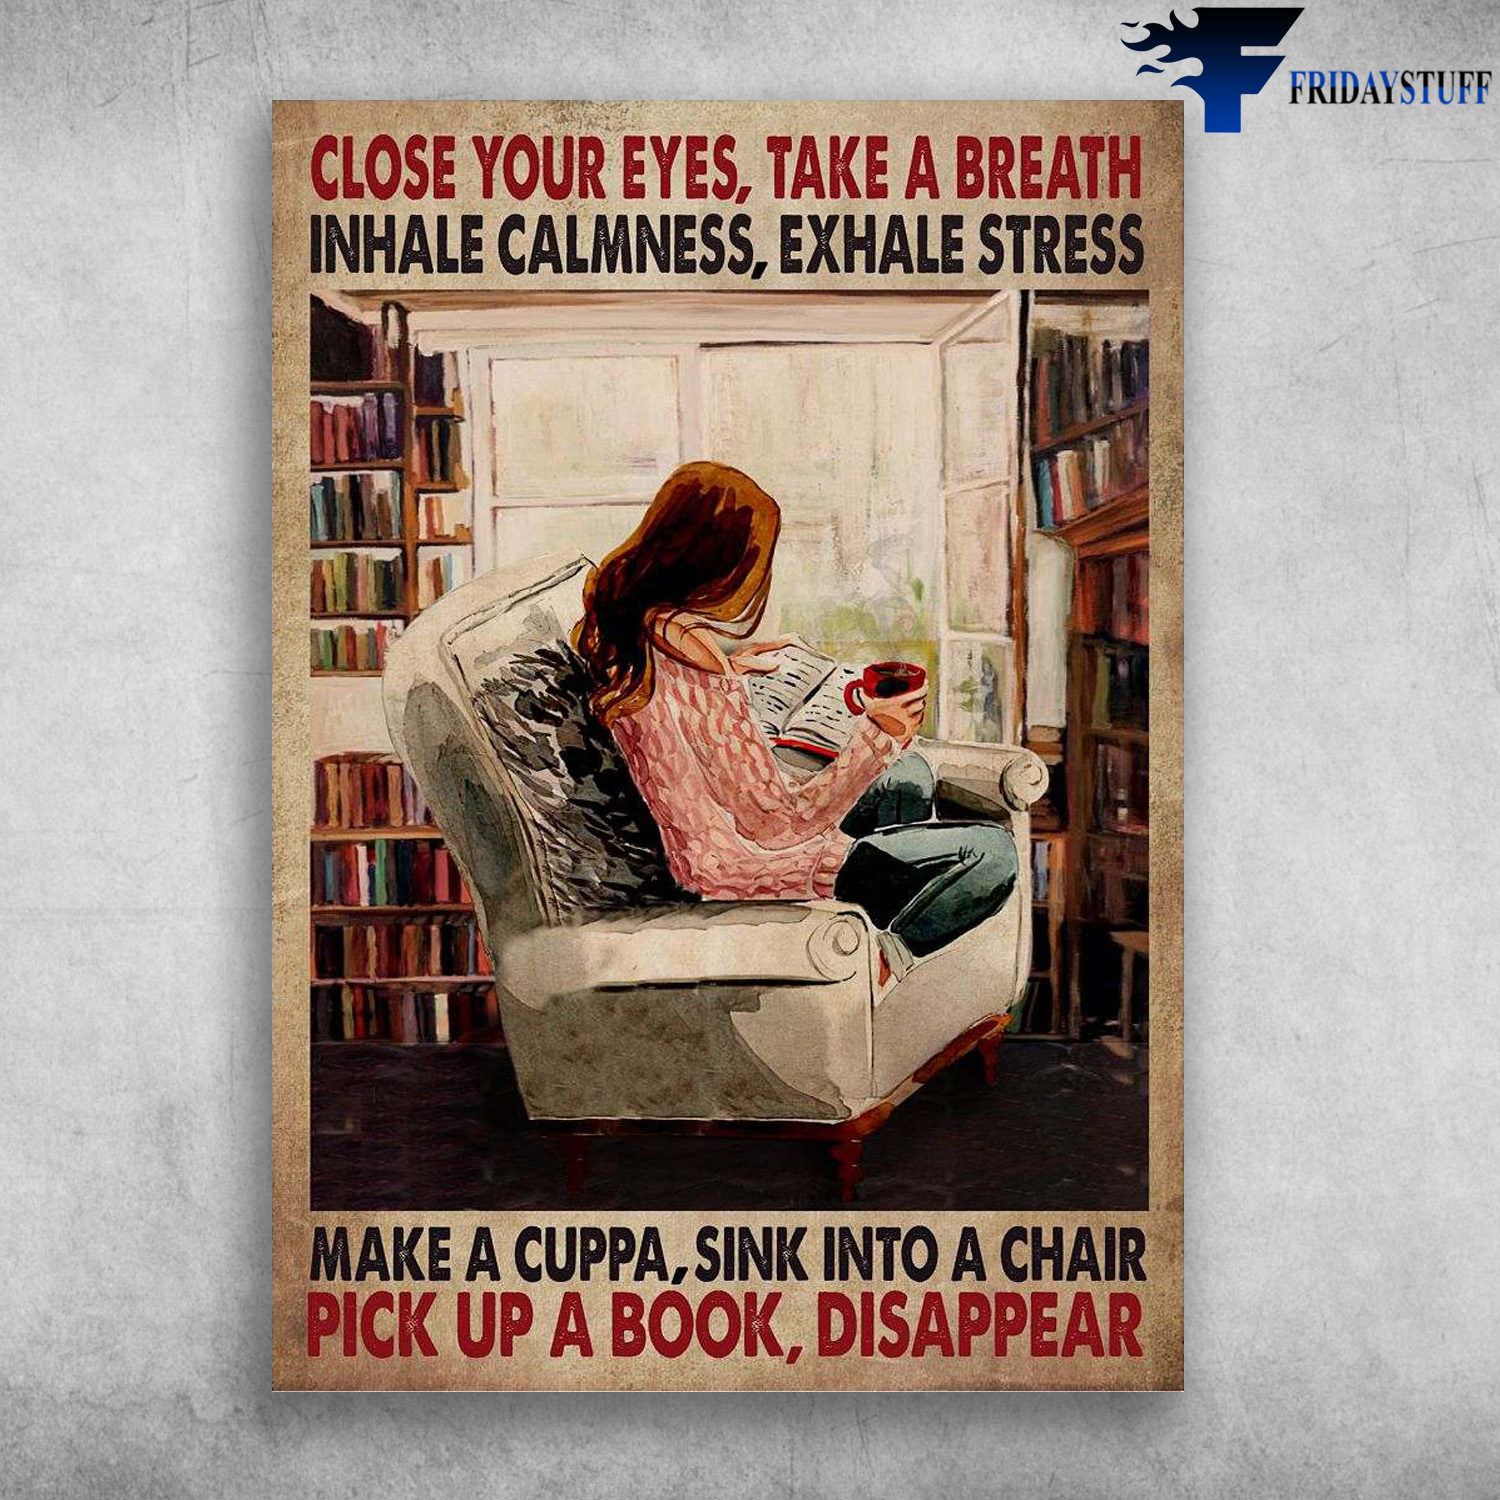 Girl Reads Book, Reading Book - Close Your Eyes, Take A Breath, Inhale Calmness, Exhale Stress, Make A Cuppa, Sink Into A Chair, Pick Up A Book, Disappear, Tea And Book